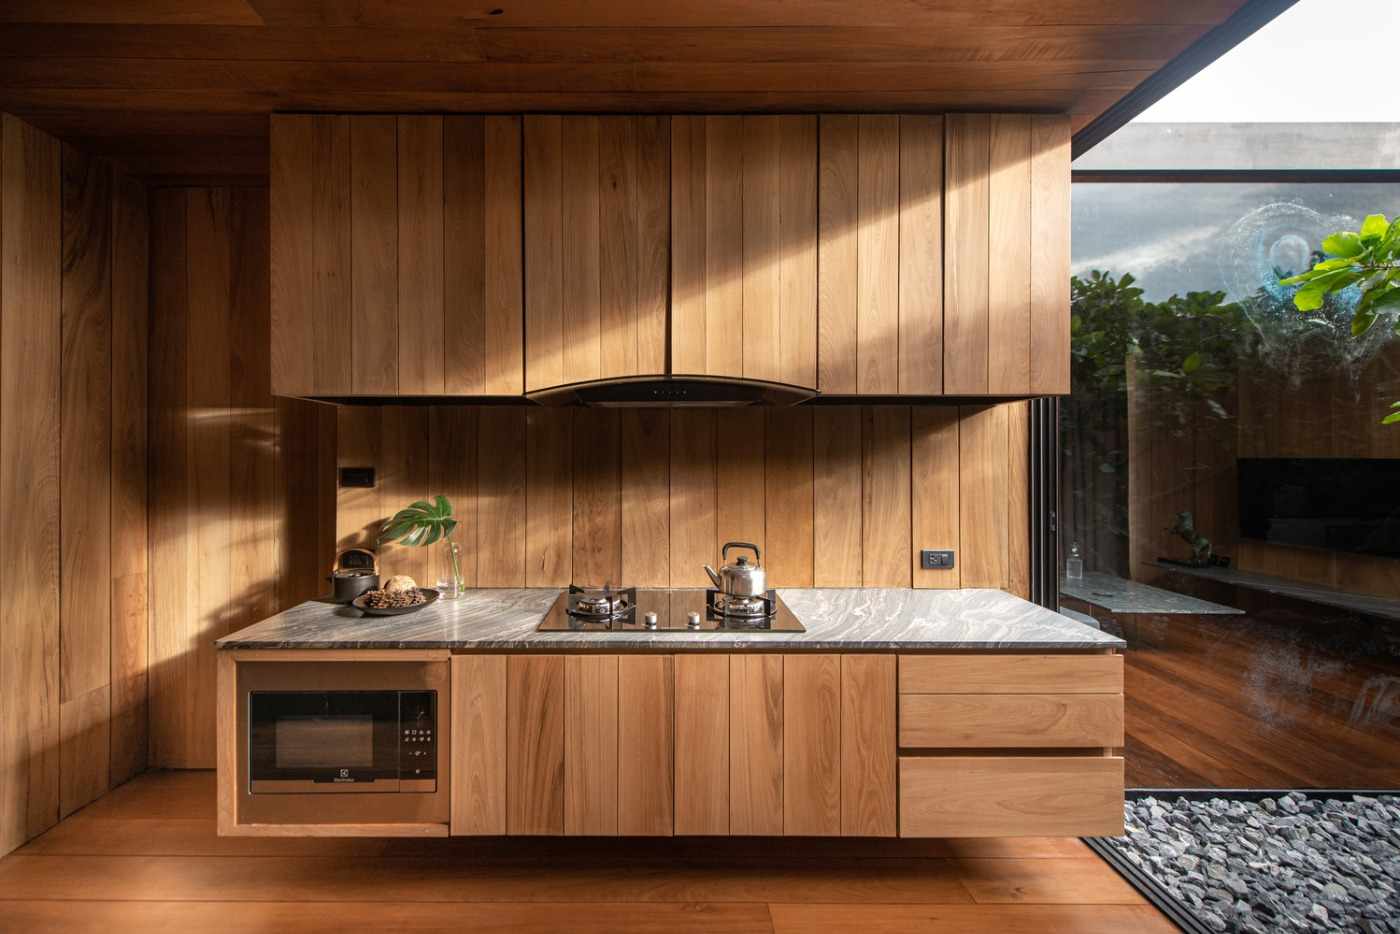 modern built-in kitchen made of wood materials and kitchen appliances